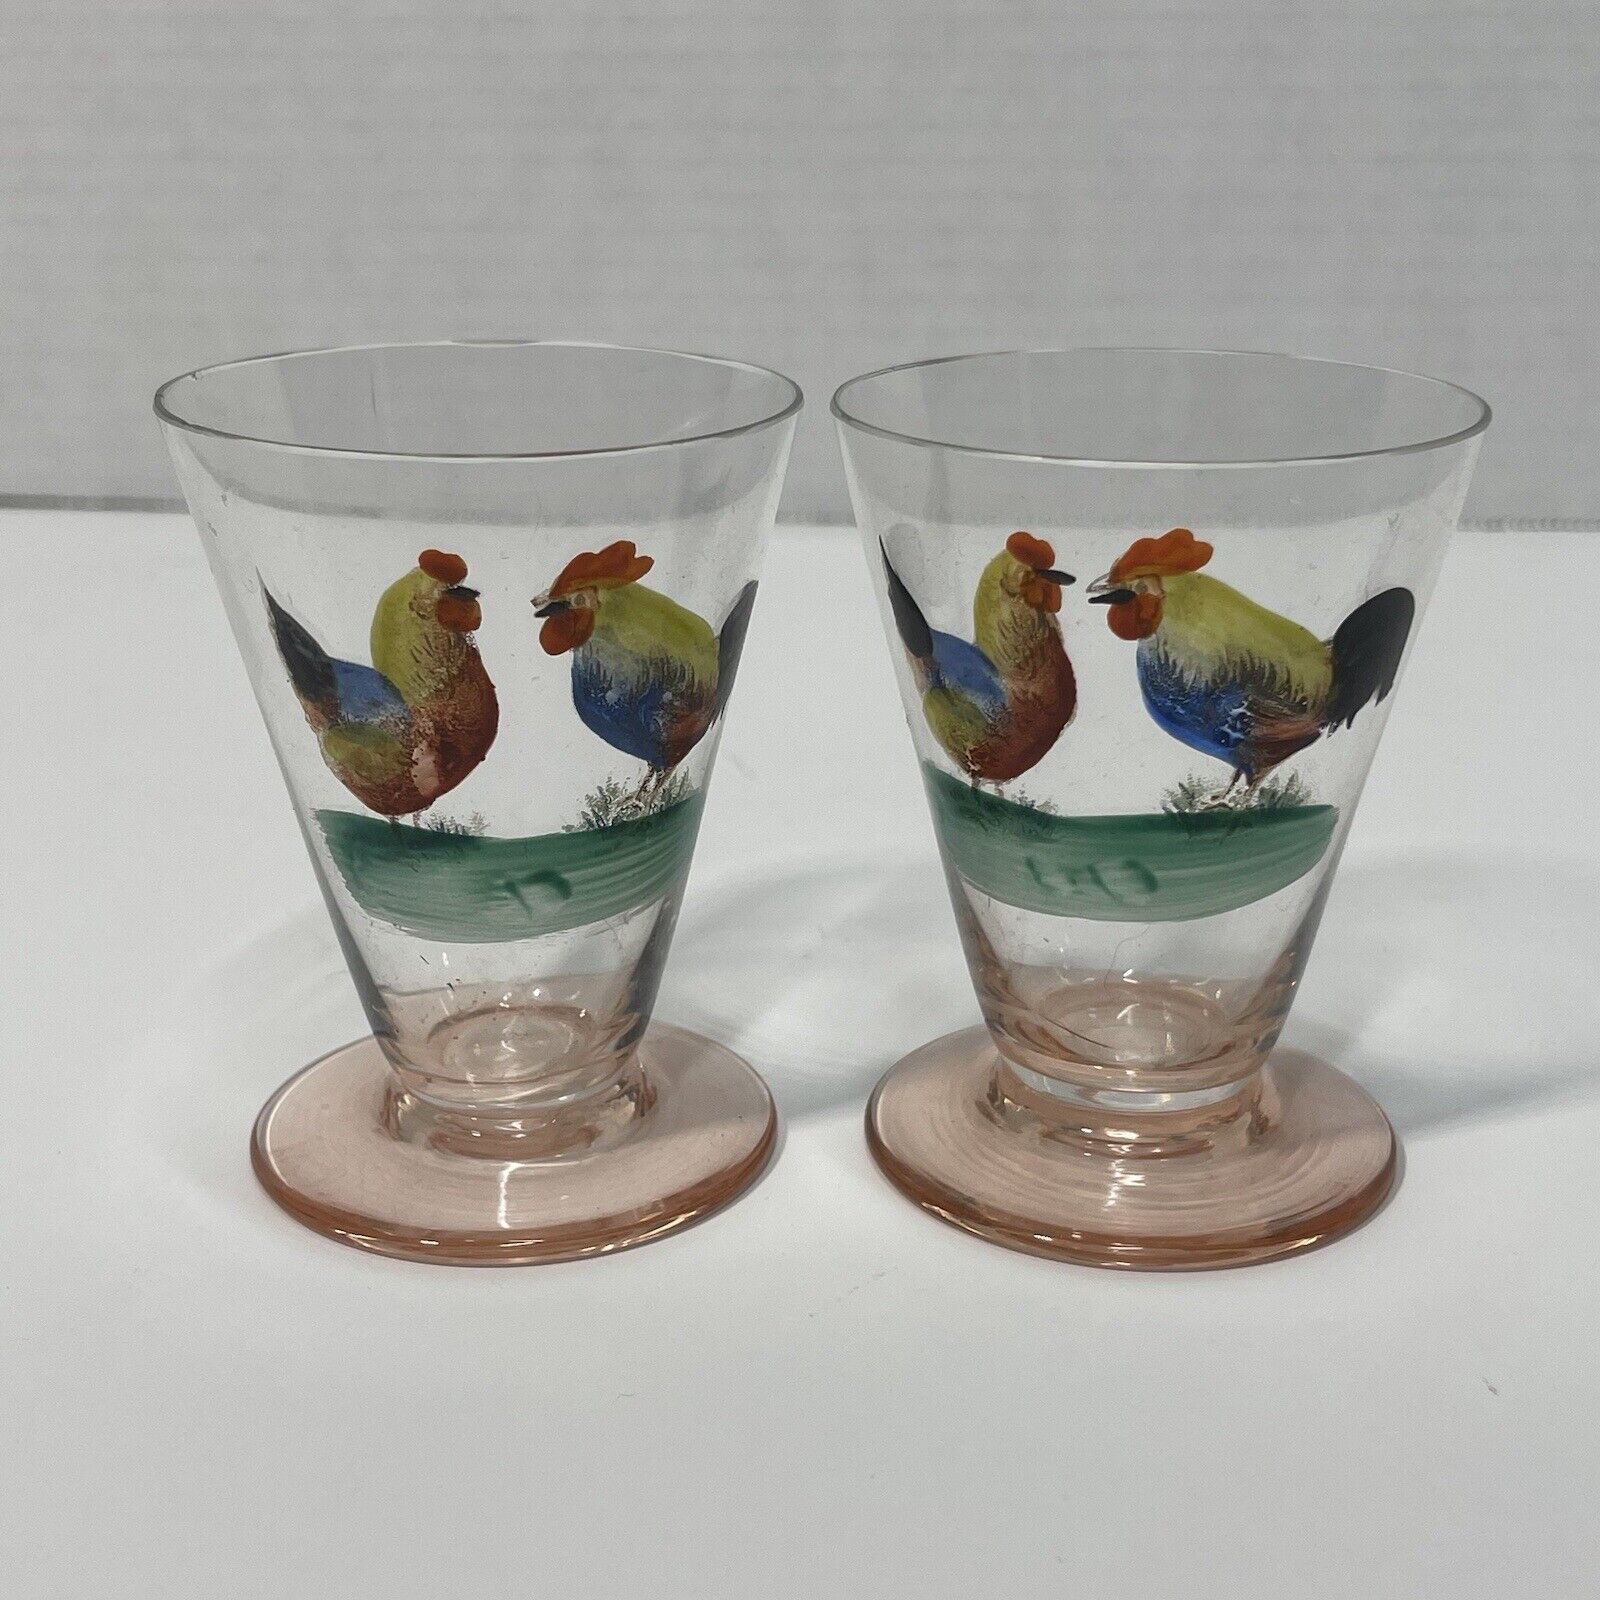 Vintage Pair Hand-Painted Rooster Shot Glasses. Unique Barware. Good Condition.